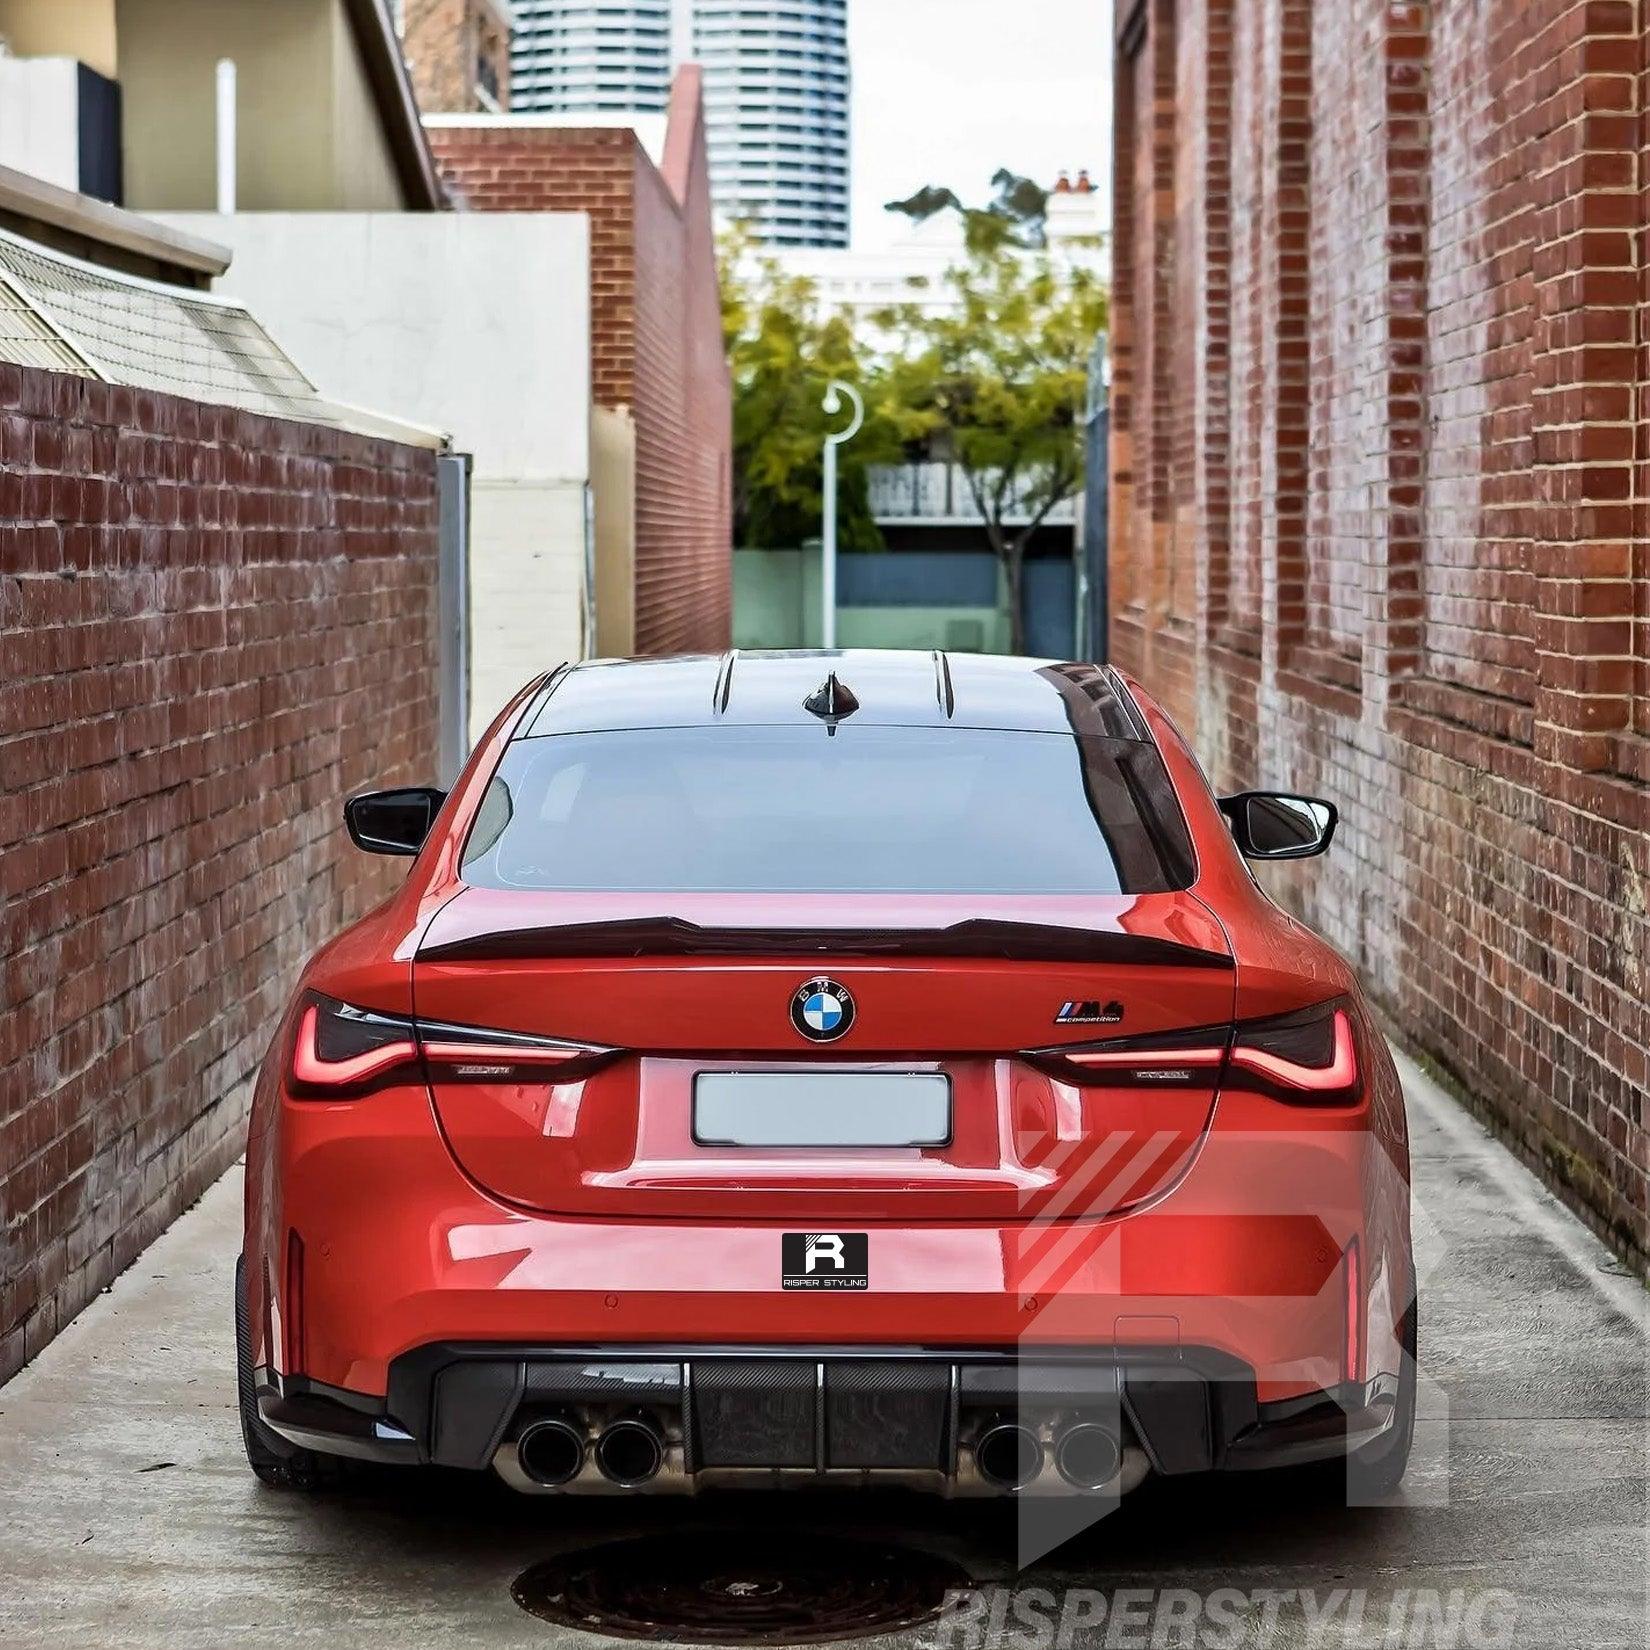 BMW 4 SERIES G22 / M4 G82 2 DOOR - PSM STYLE DUCK TAIL SPOILER - GLOSS BLACK - RisperStyling